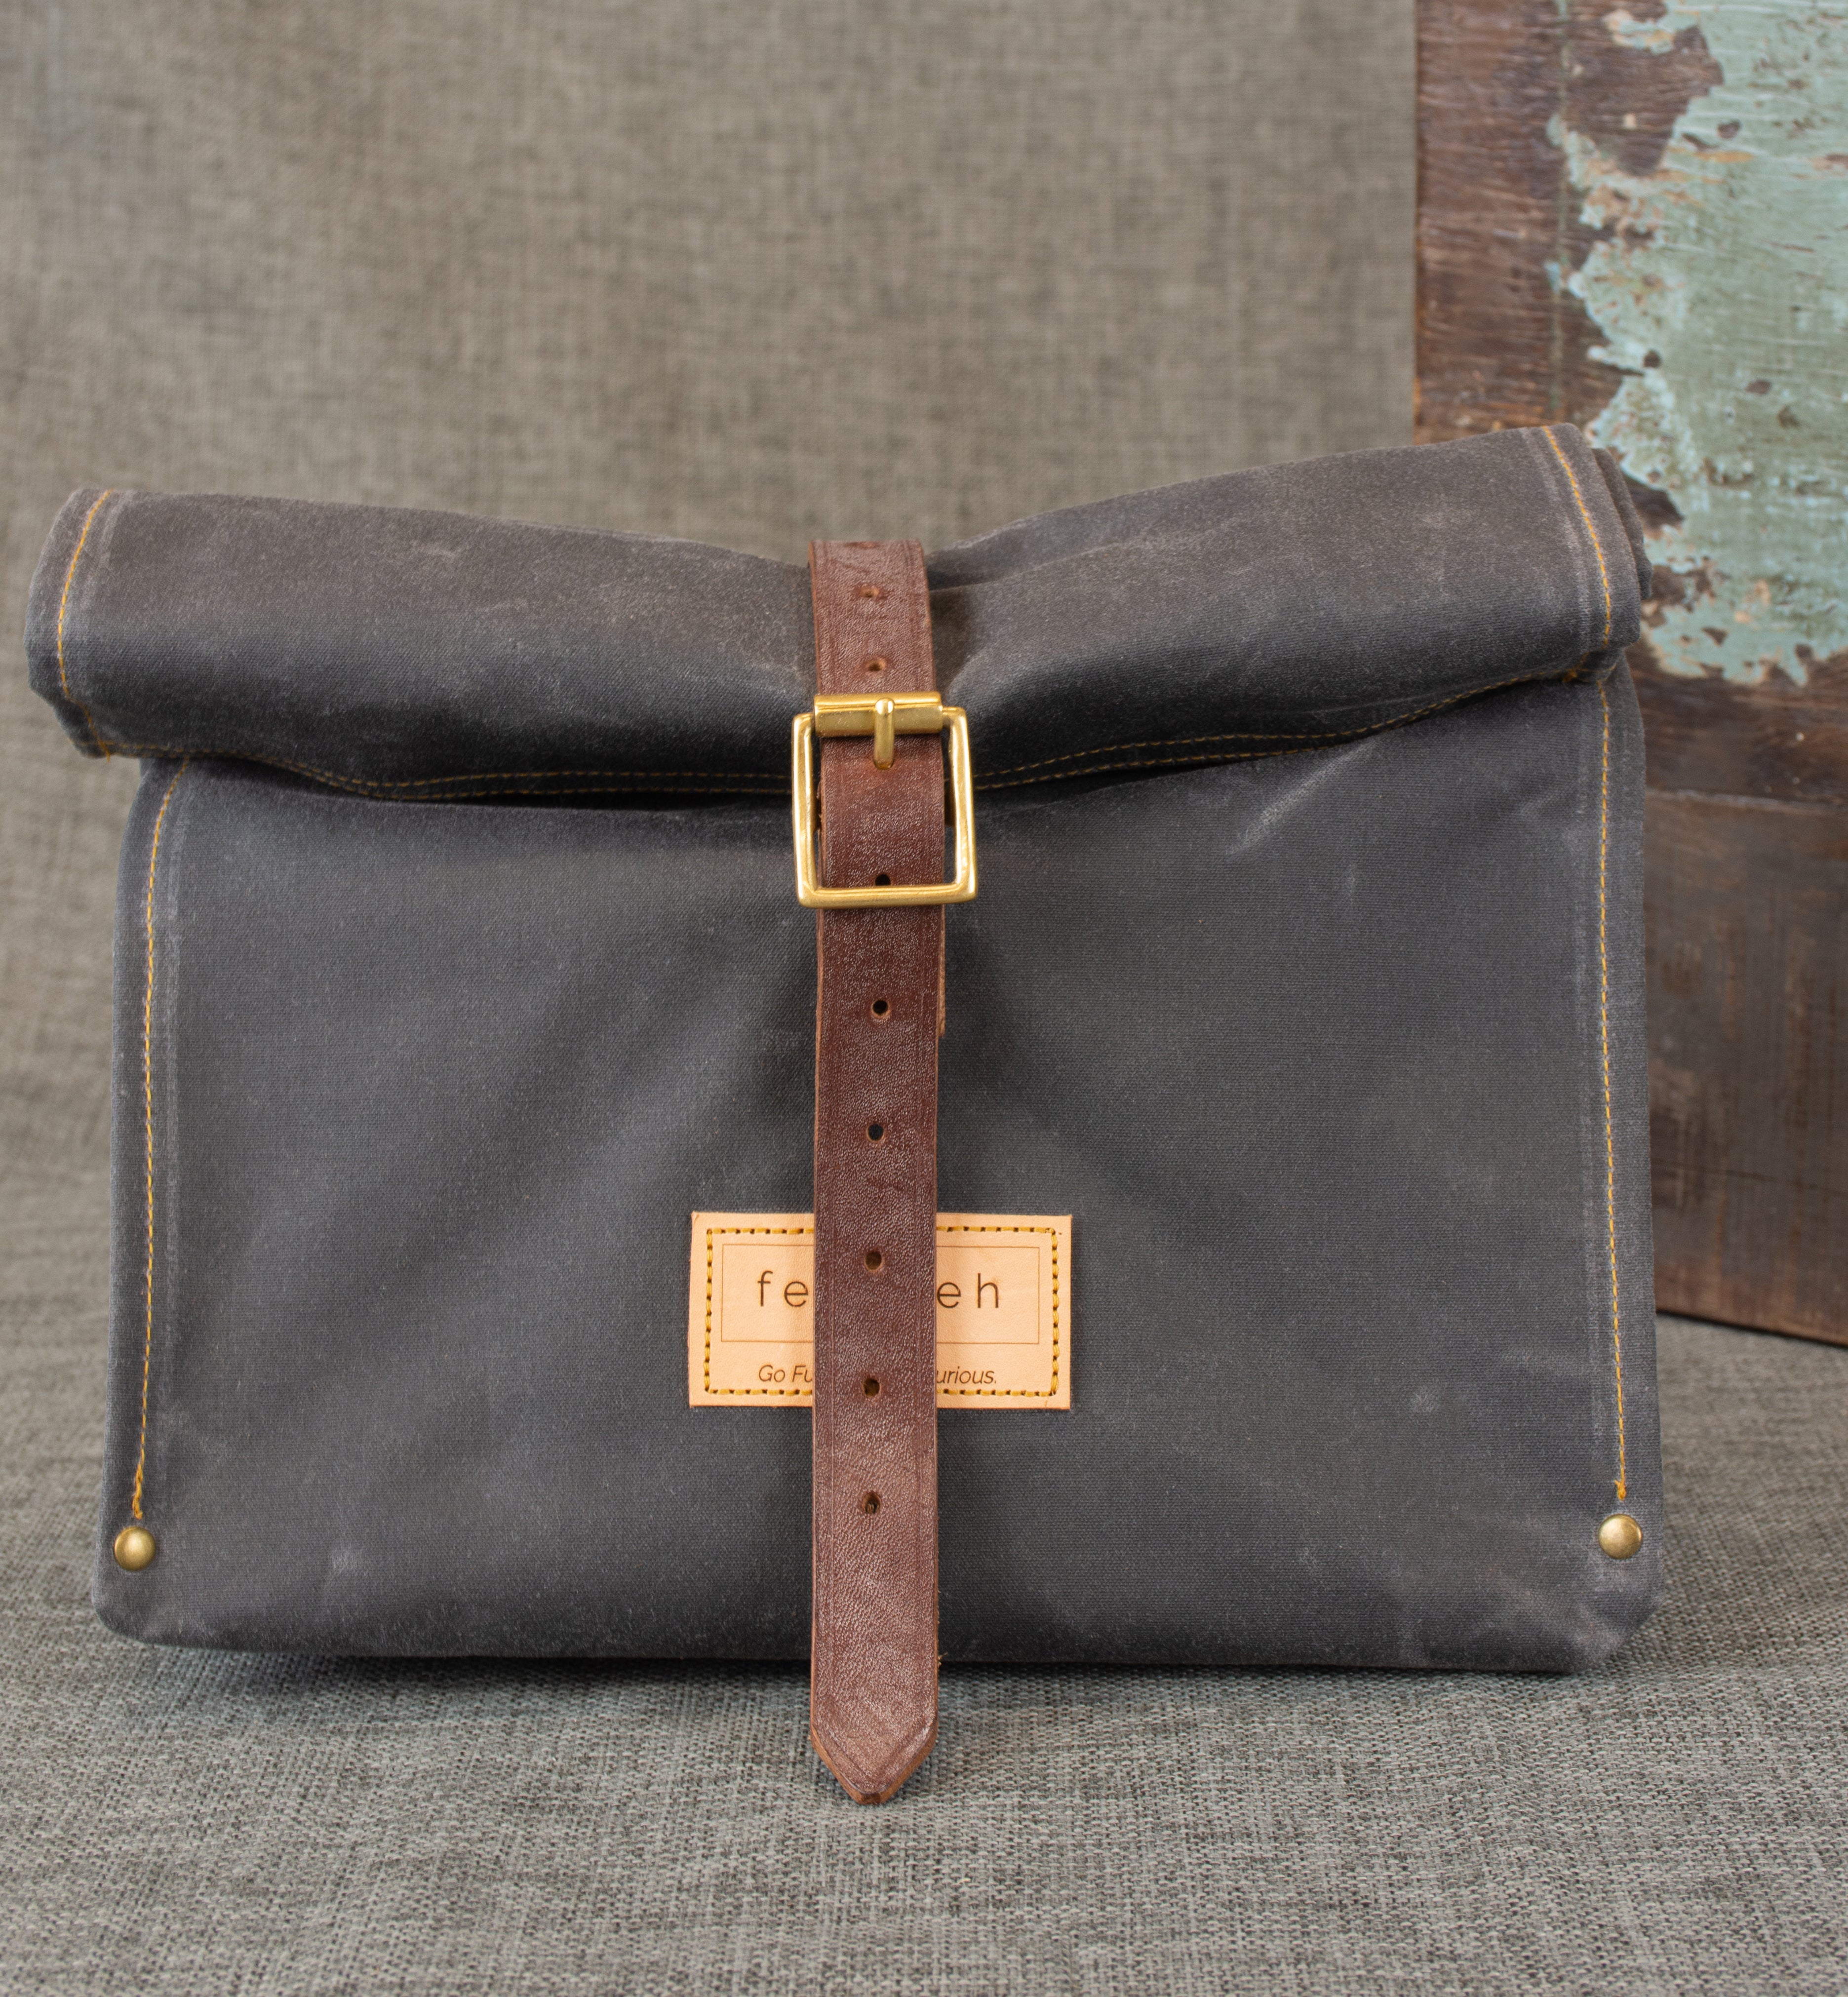 Image shows grey waxed cotton roll top bag with a brown oak bark tanned leather strap